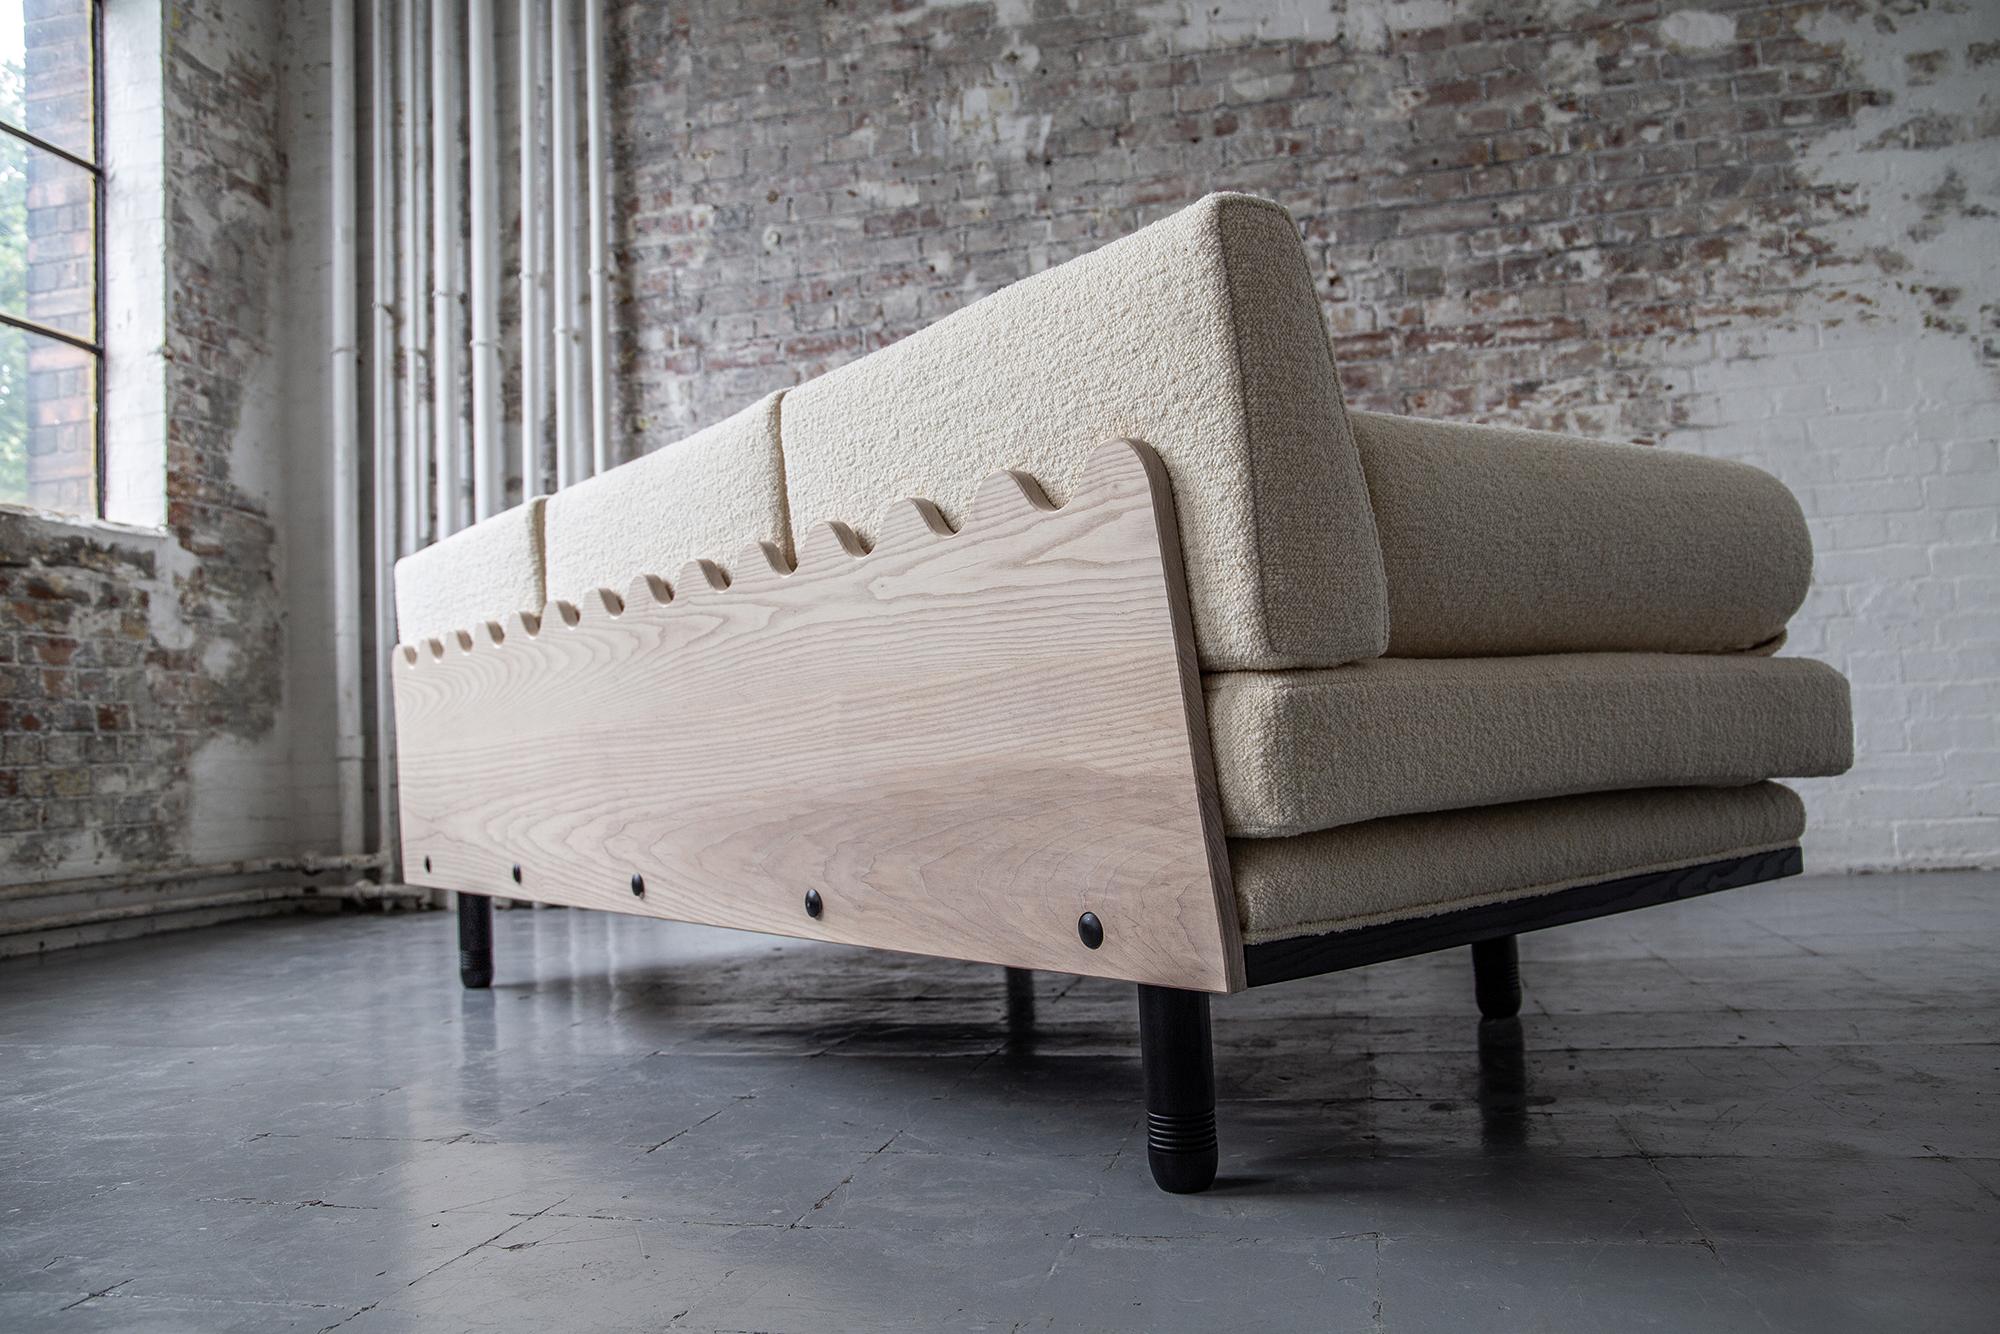 Post-Modern Baalbek, Trapezoidal Sofa Daybed by Toad Gallery, Contemporary Edition 2020